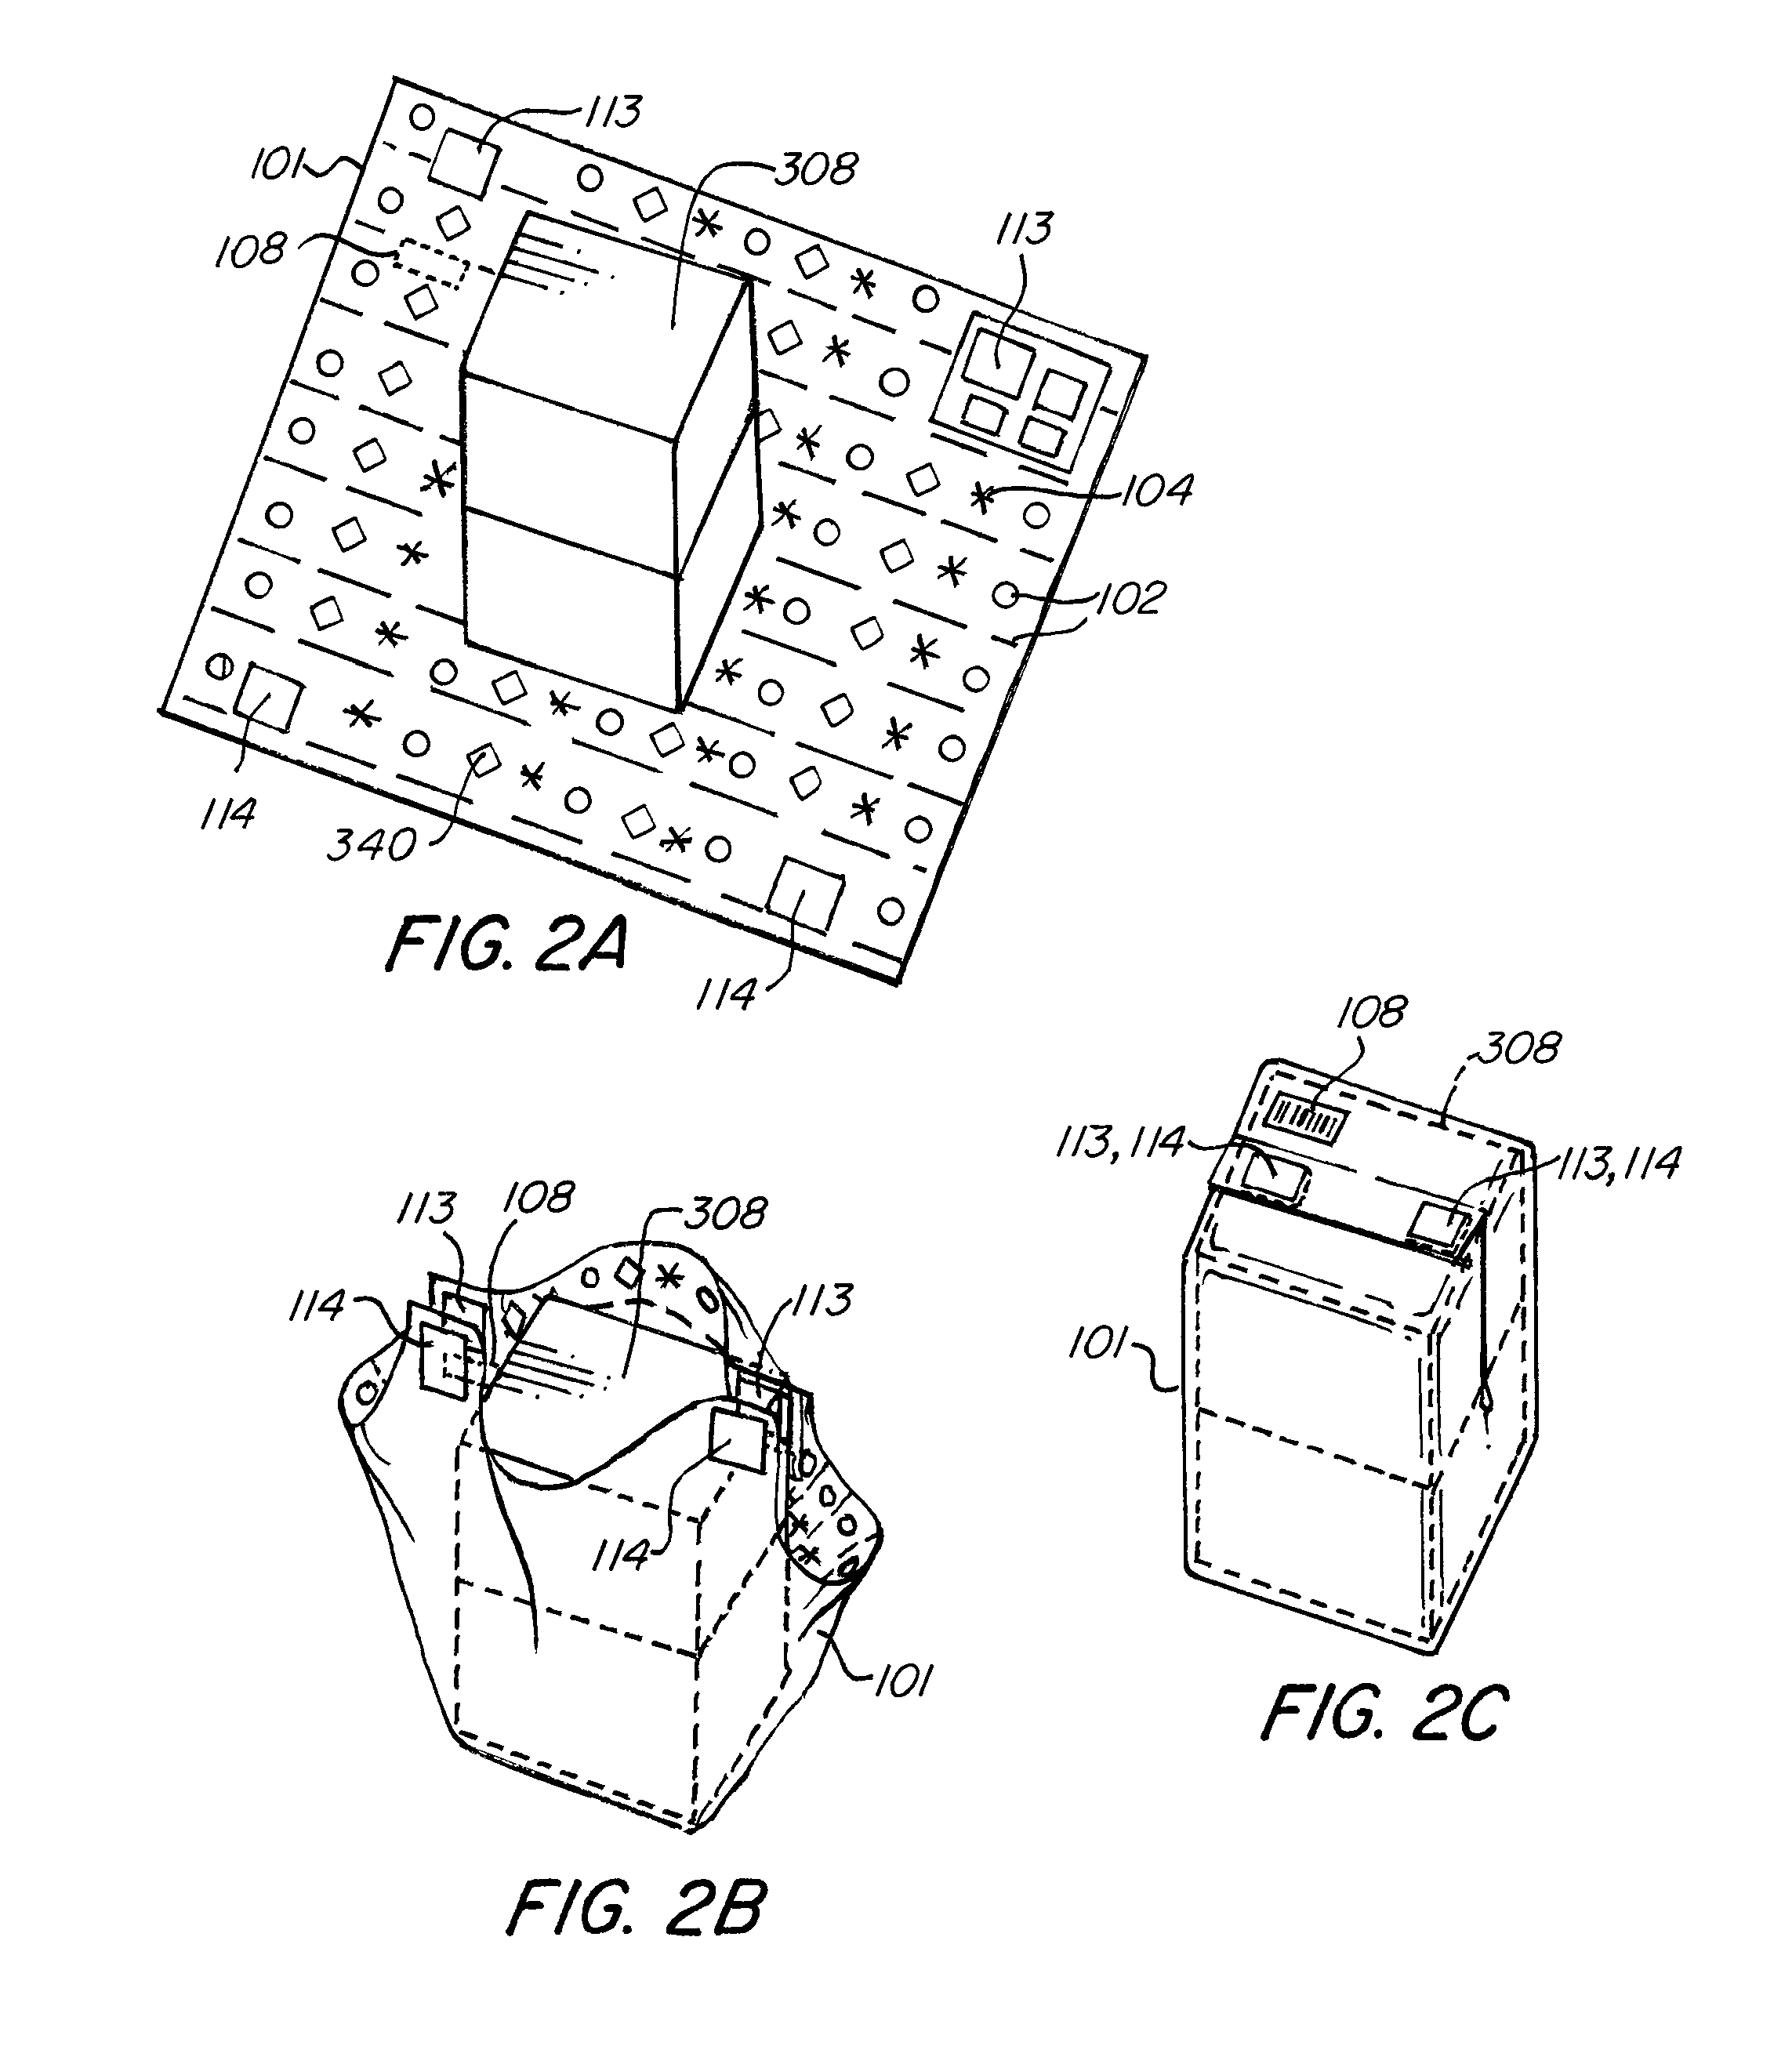 Self-fitting, self-adjusting, automatically adjusting and/or automatically fitting fastener or closing device for packaging